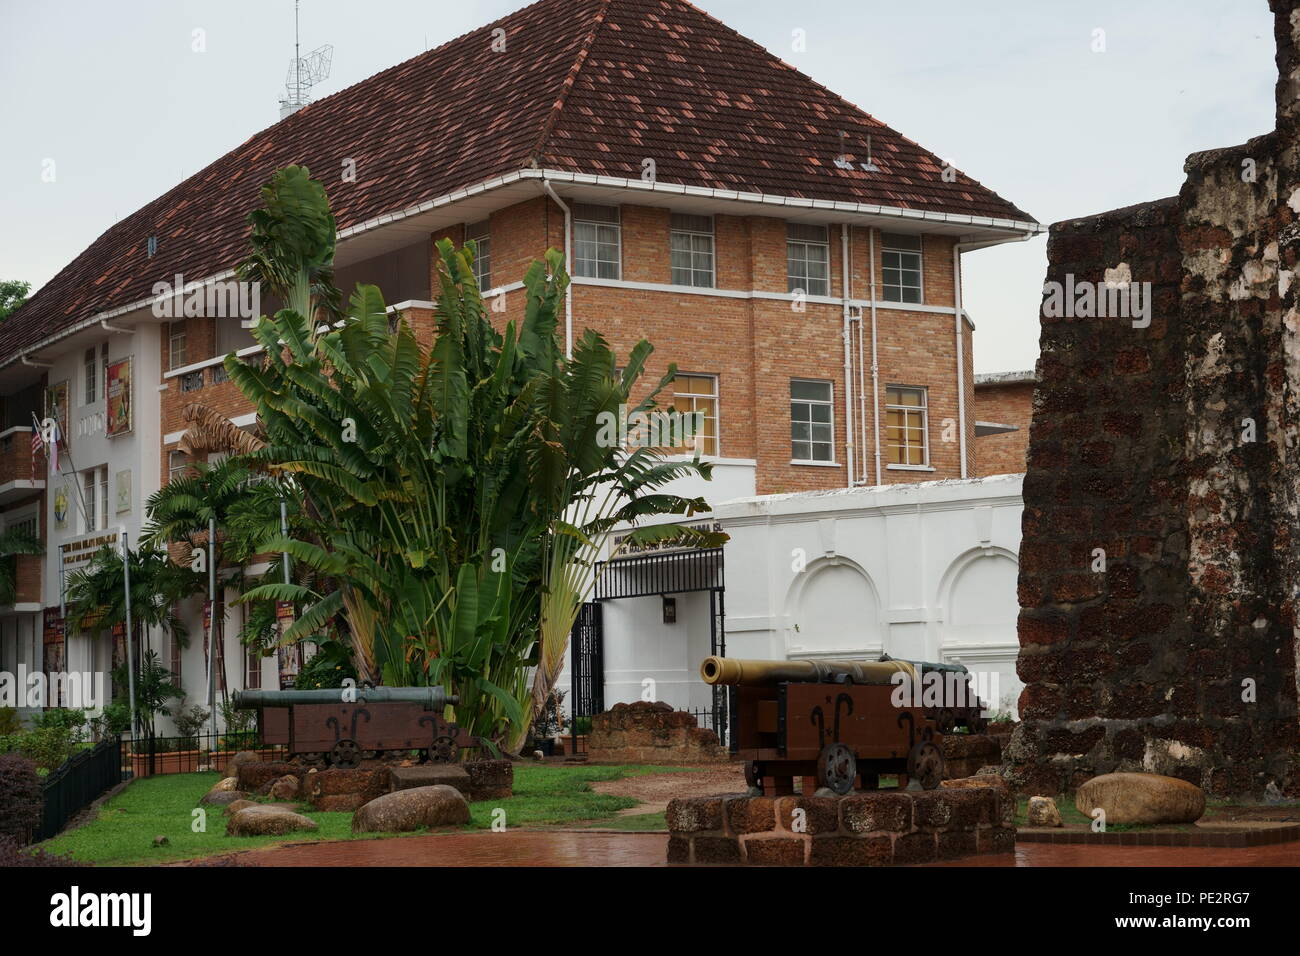 Government building  near A Famosa Stock Photo